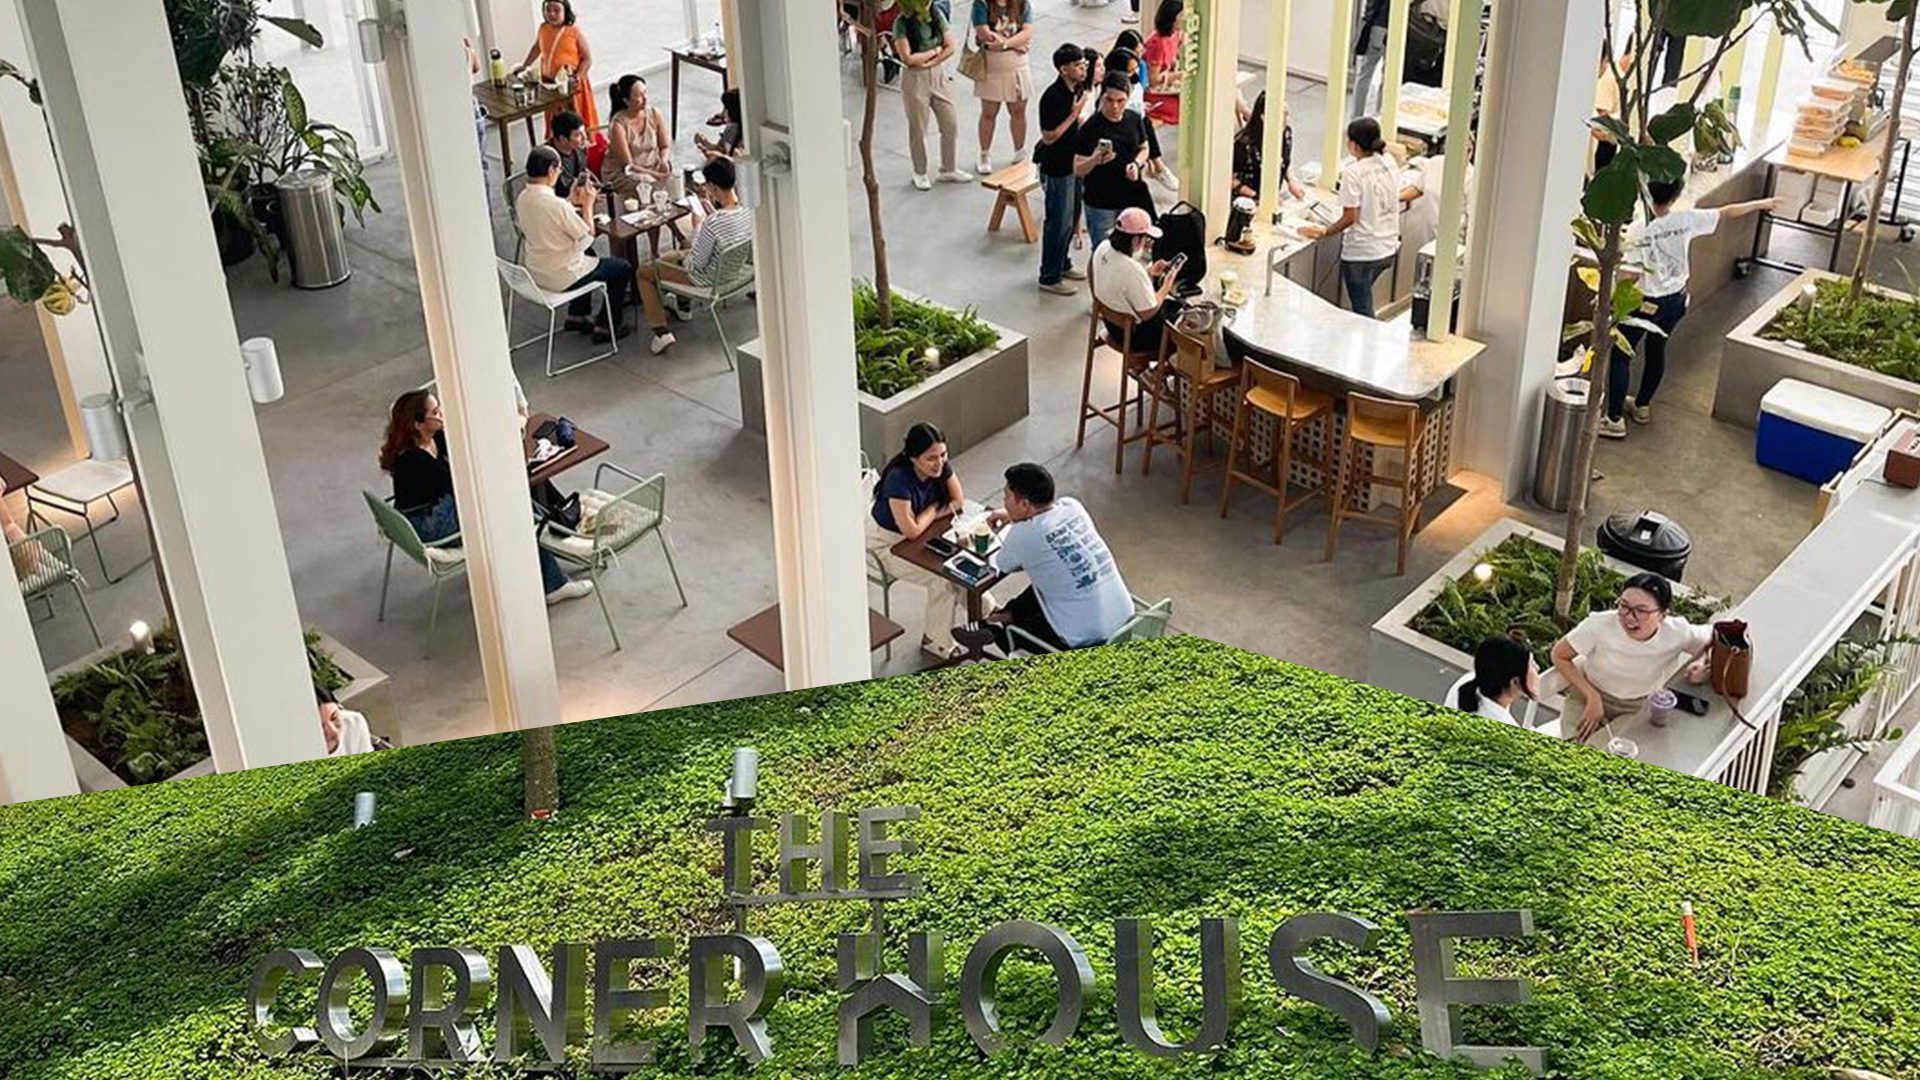 LIST: Where to eat, hang out, shop at The Corner House in San Juan City